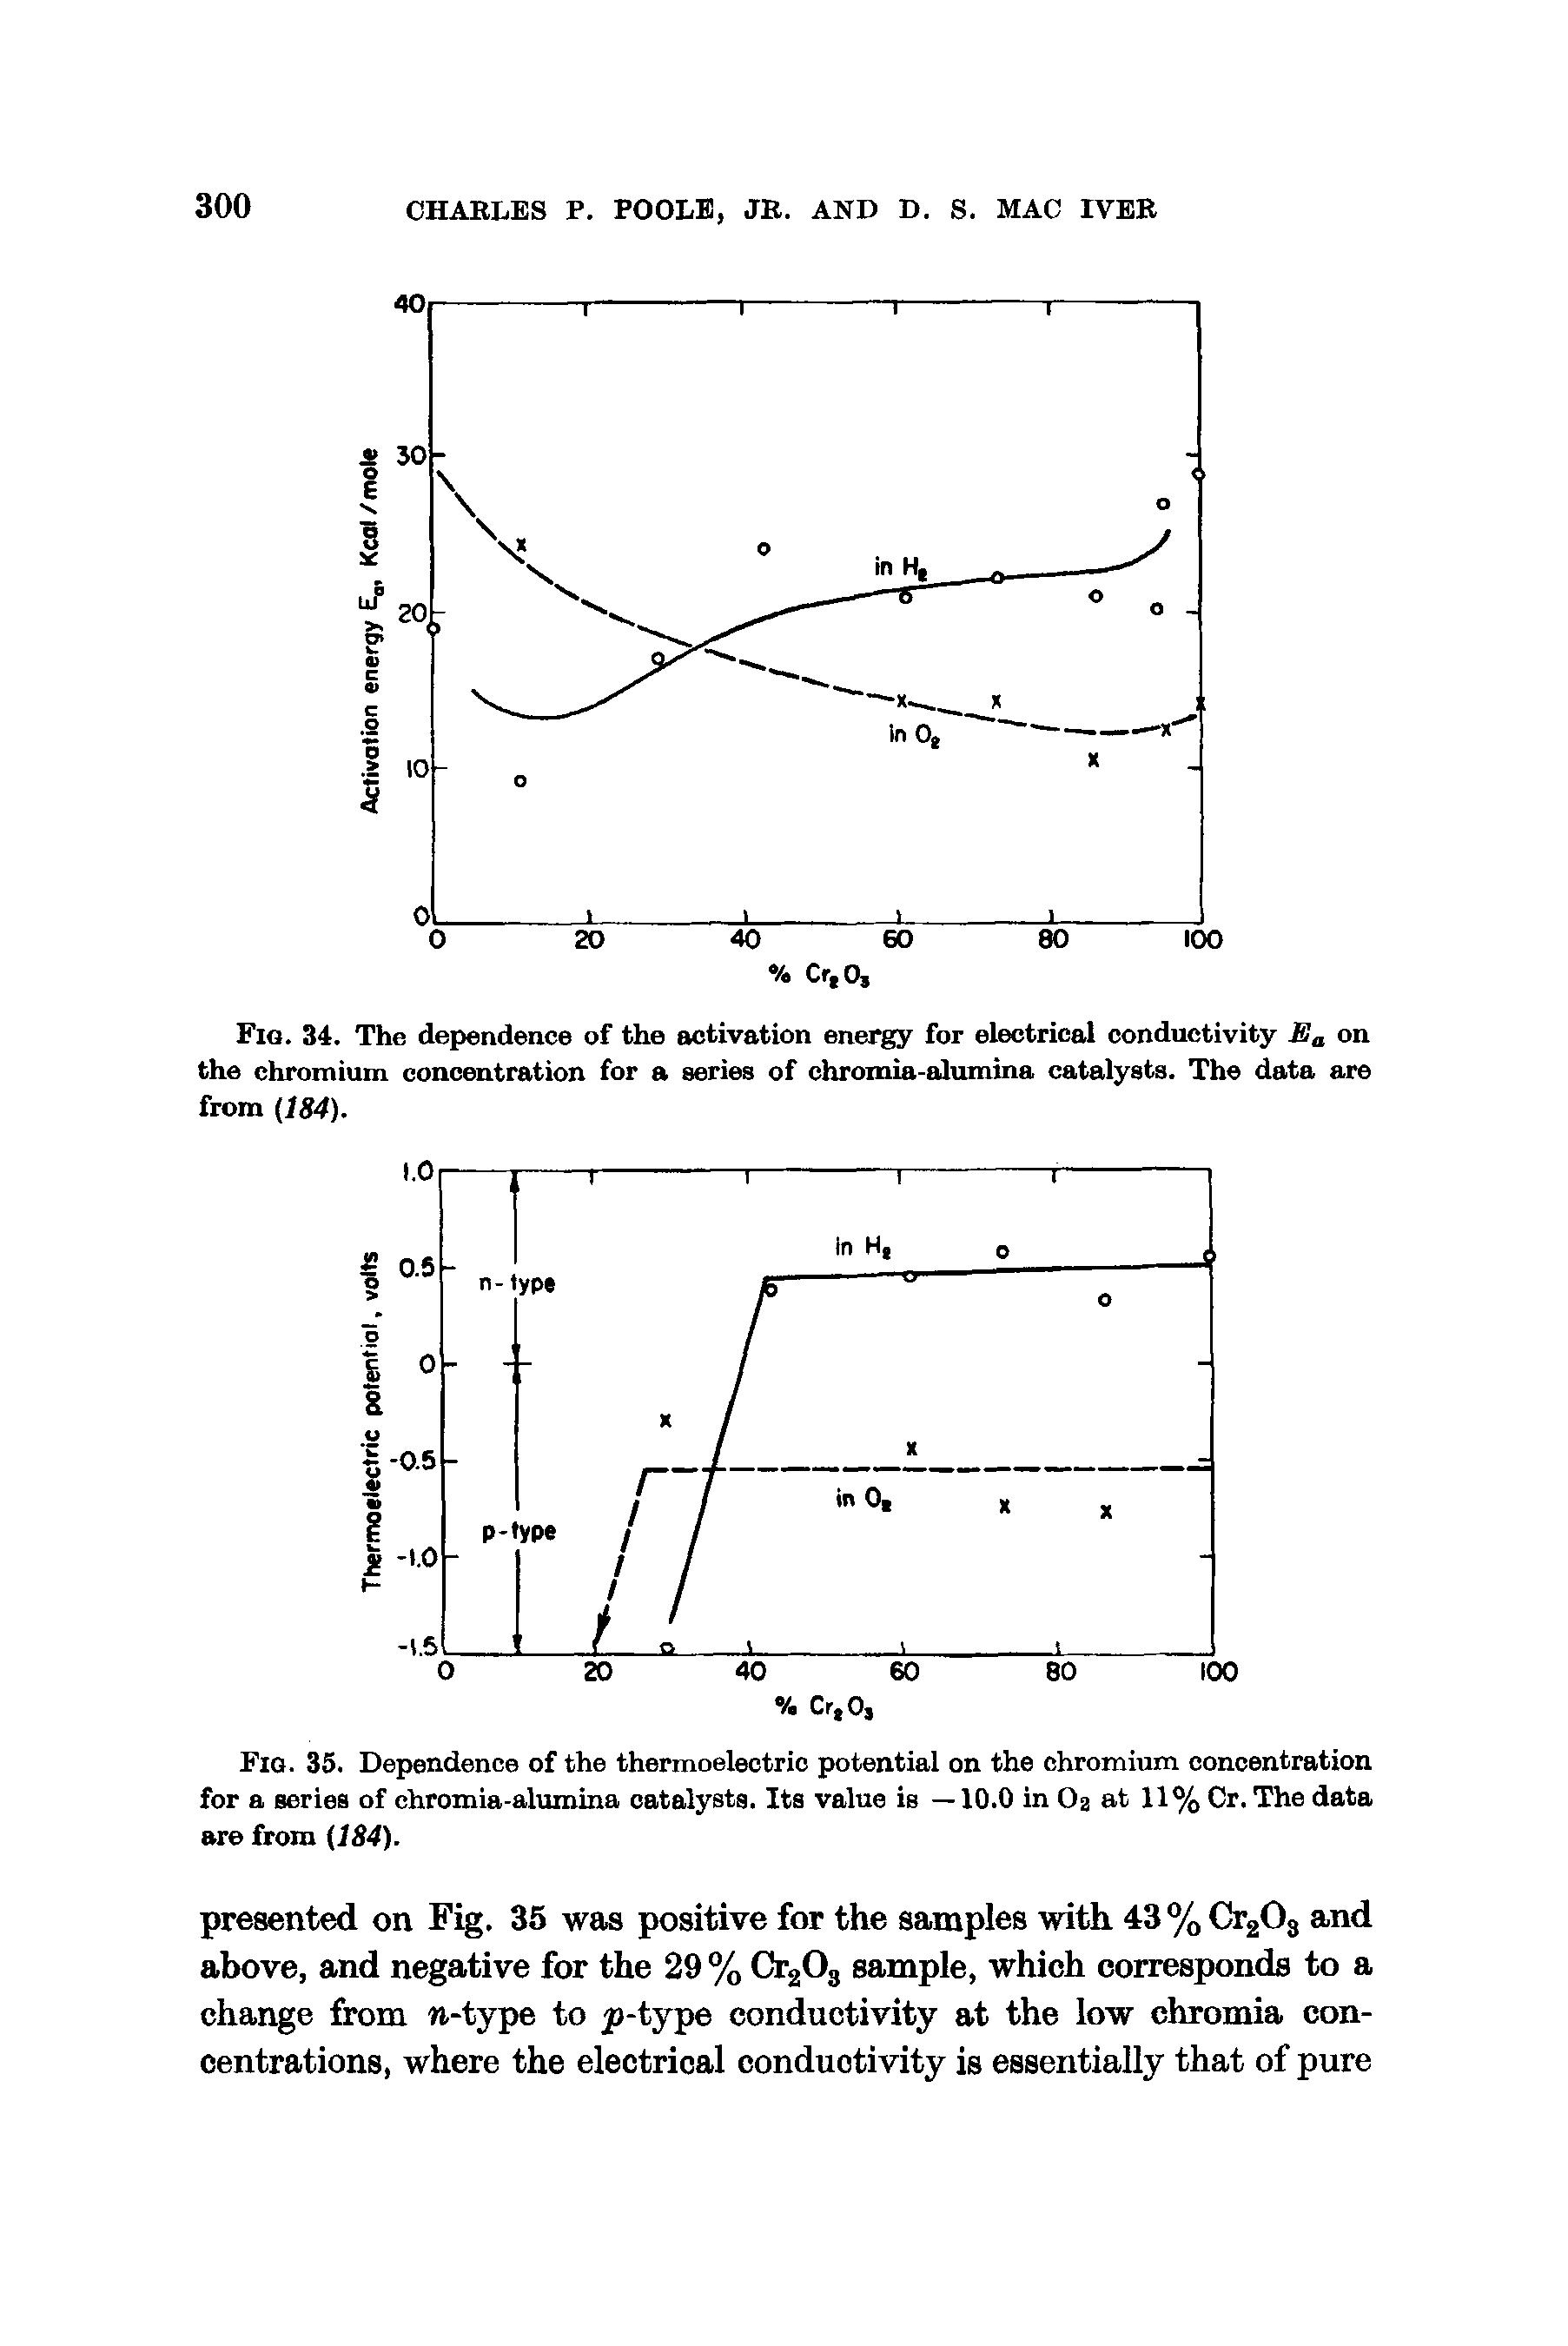 Fig. 34. The dependence of the activation energy for electrical conductivity Ea on the chromium concentration for a series of chromia-alumina catalysts. The data are from 184).